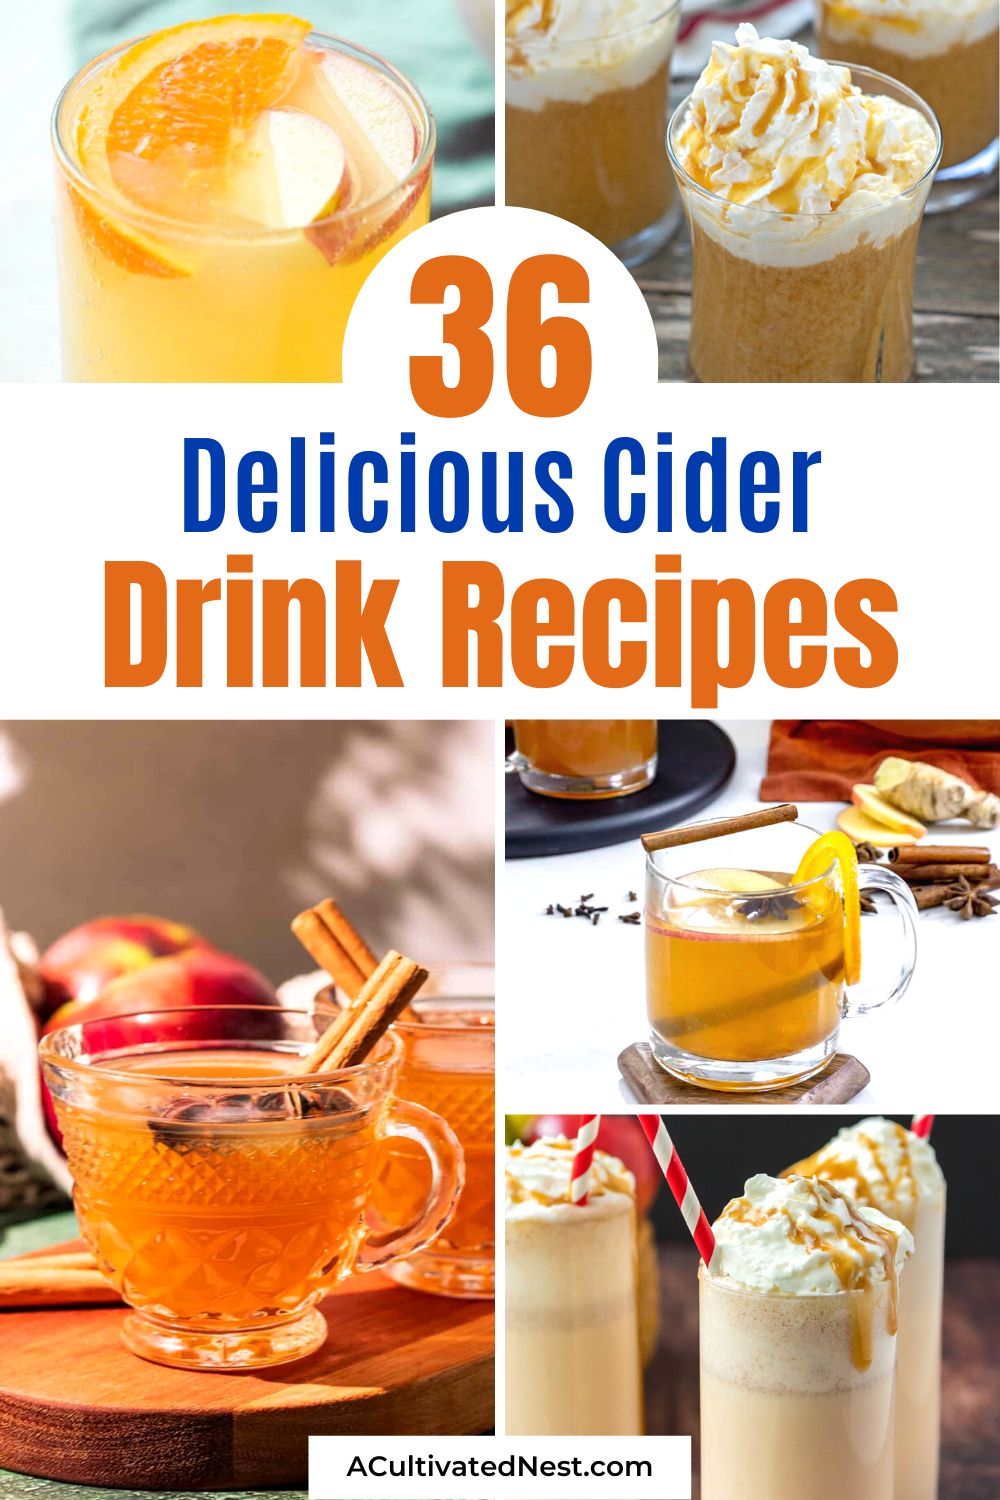 36 Delicious Cider Drink Recipes- Spice up your autumn evenings with our handpicked selection of delicious cider drink recipes! From classic hot apple ciders to creative cider cocktails, these recipes are sure to add a touch of warmth and flavor to your fall festivities. | #fallRecipes#FallFlavors #drinkRecipes #appleCider #ACultivatedNest